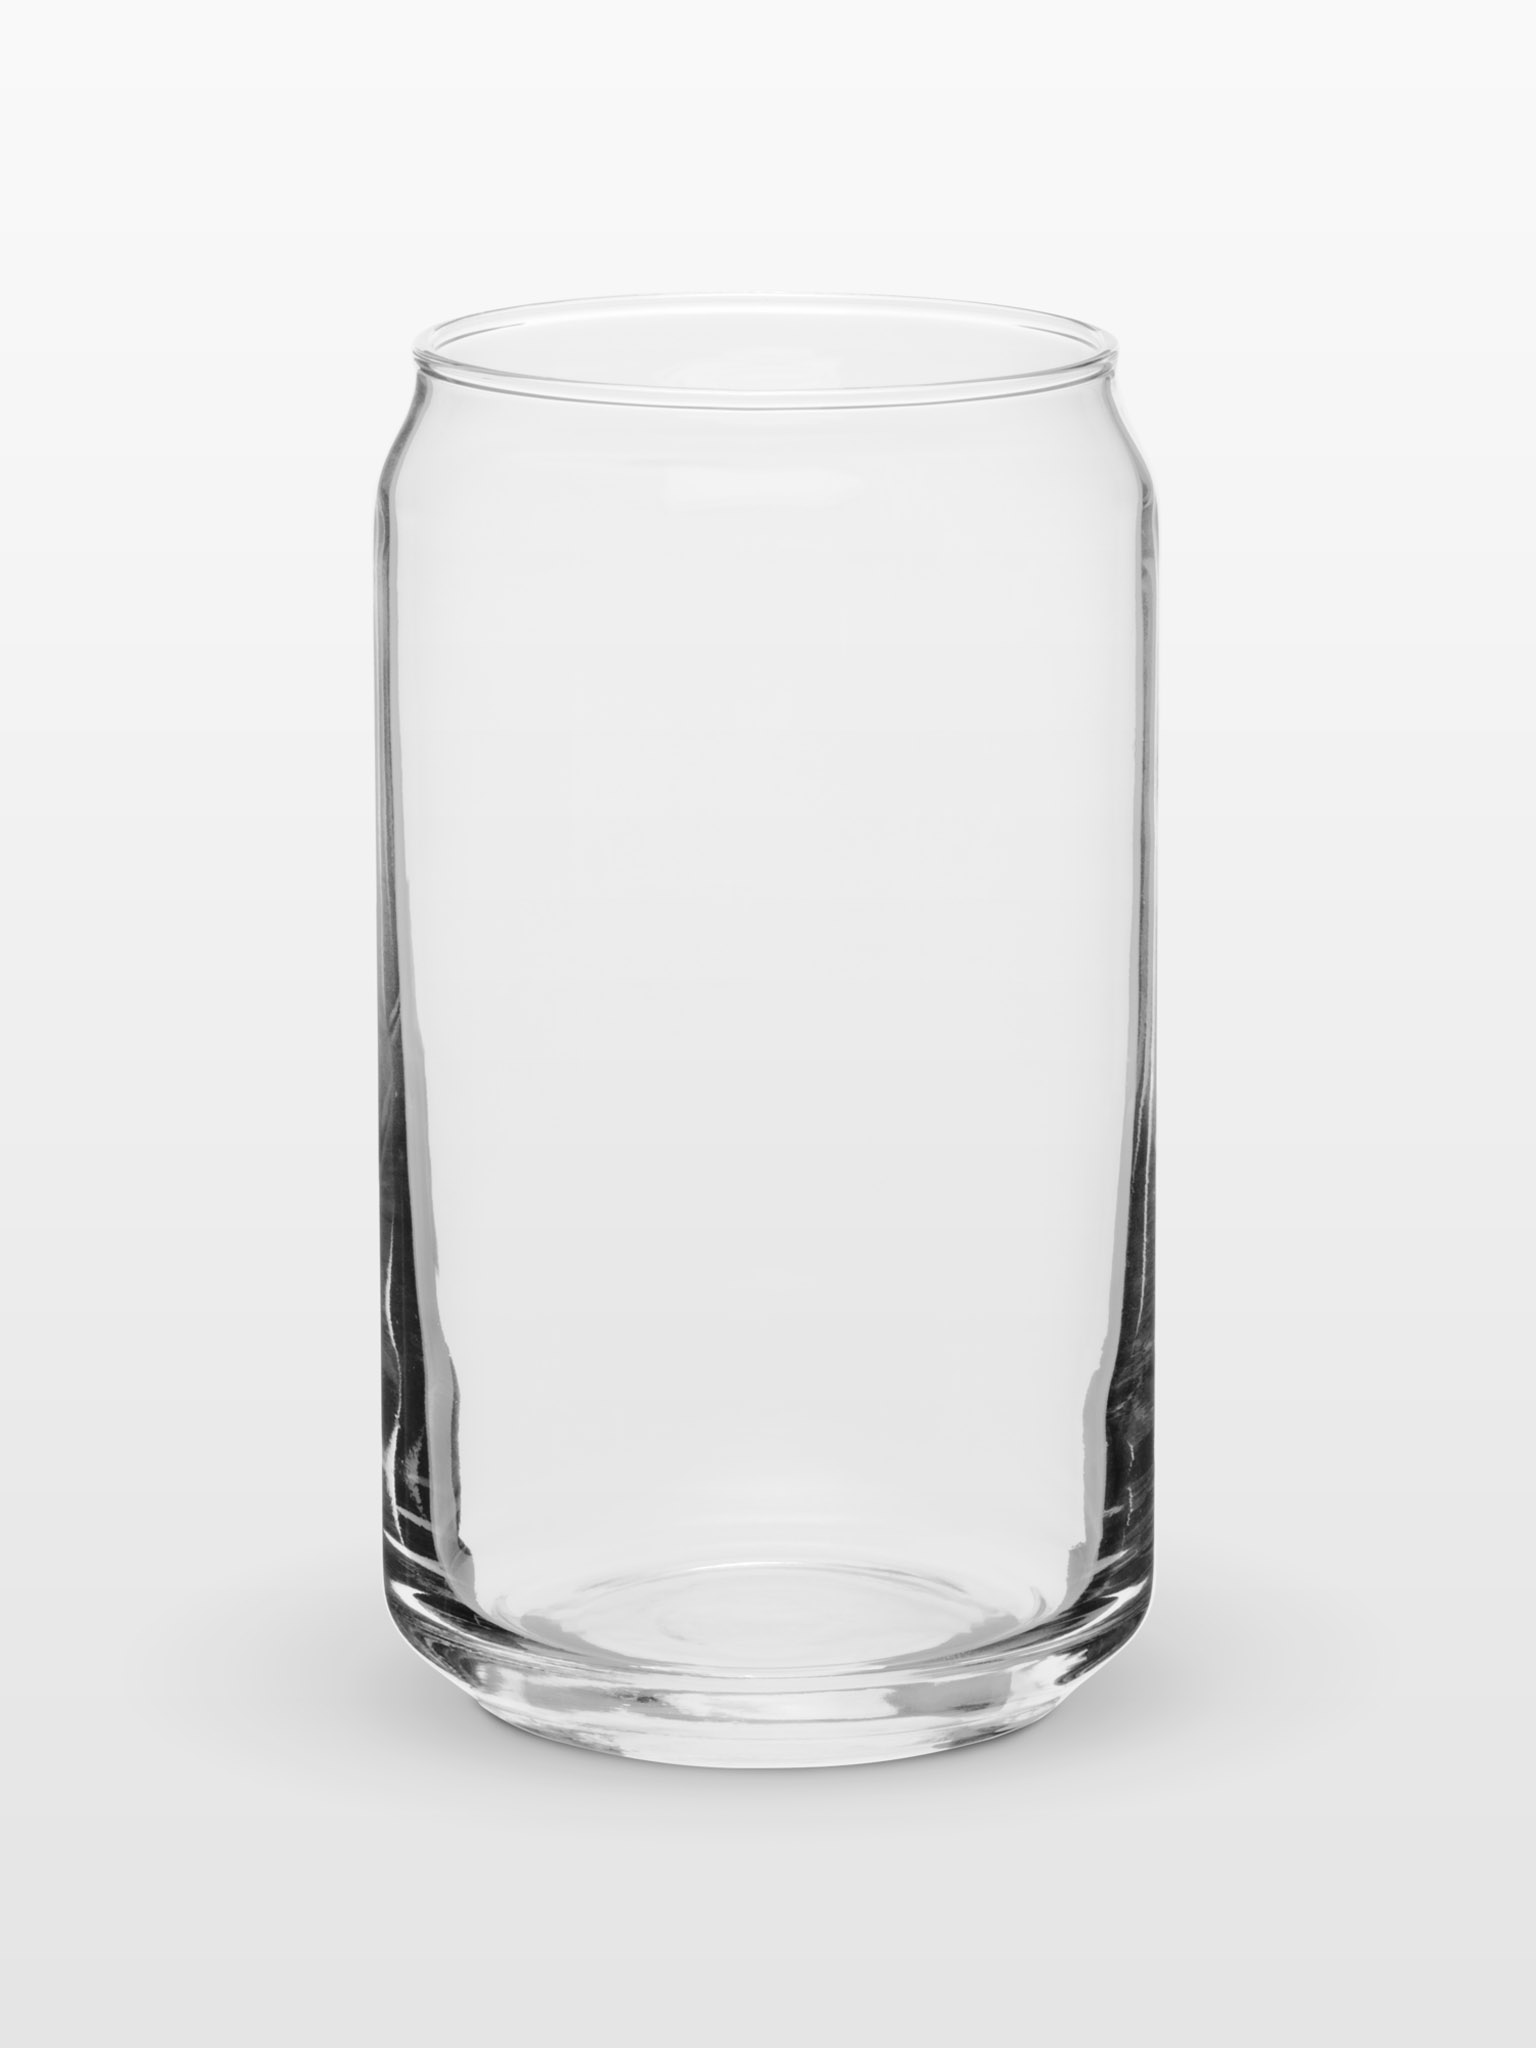 Libbey Can Shaped Beer Glass - Beer Can Glass - 16 oz